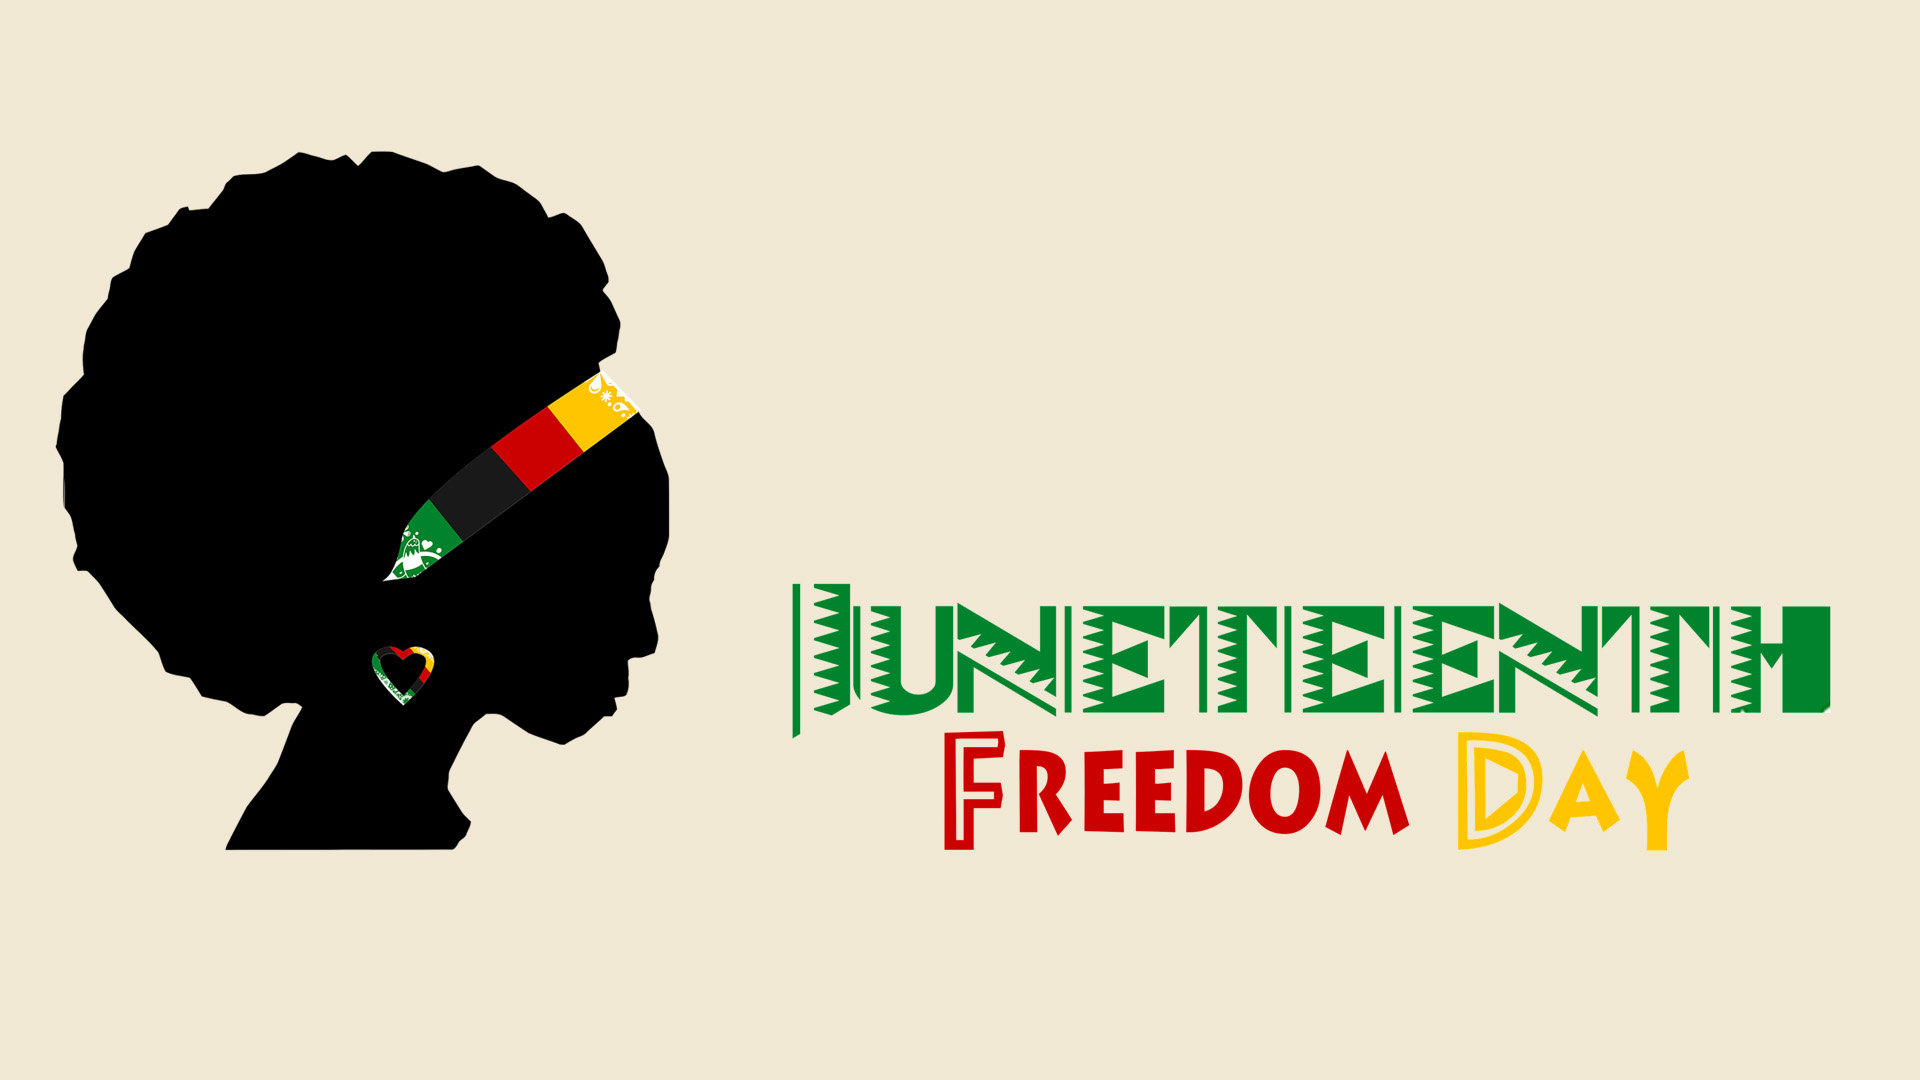 Tan background with a silhouette of woman wearing a yellow, black, red, and green bandana and same colored earrings. Woman is looking at the text that is toward the bottom right side of the graphic. Juneteenth Freedom Day written is in decorative aztec font in the center of the graphic.